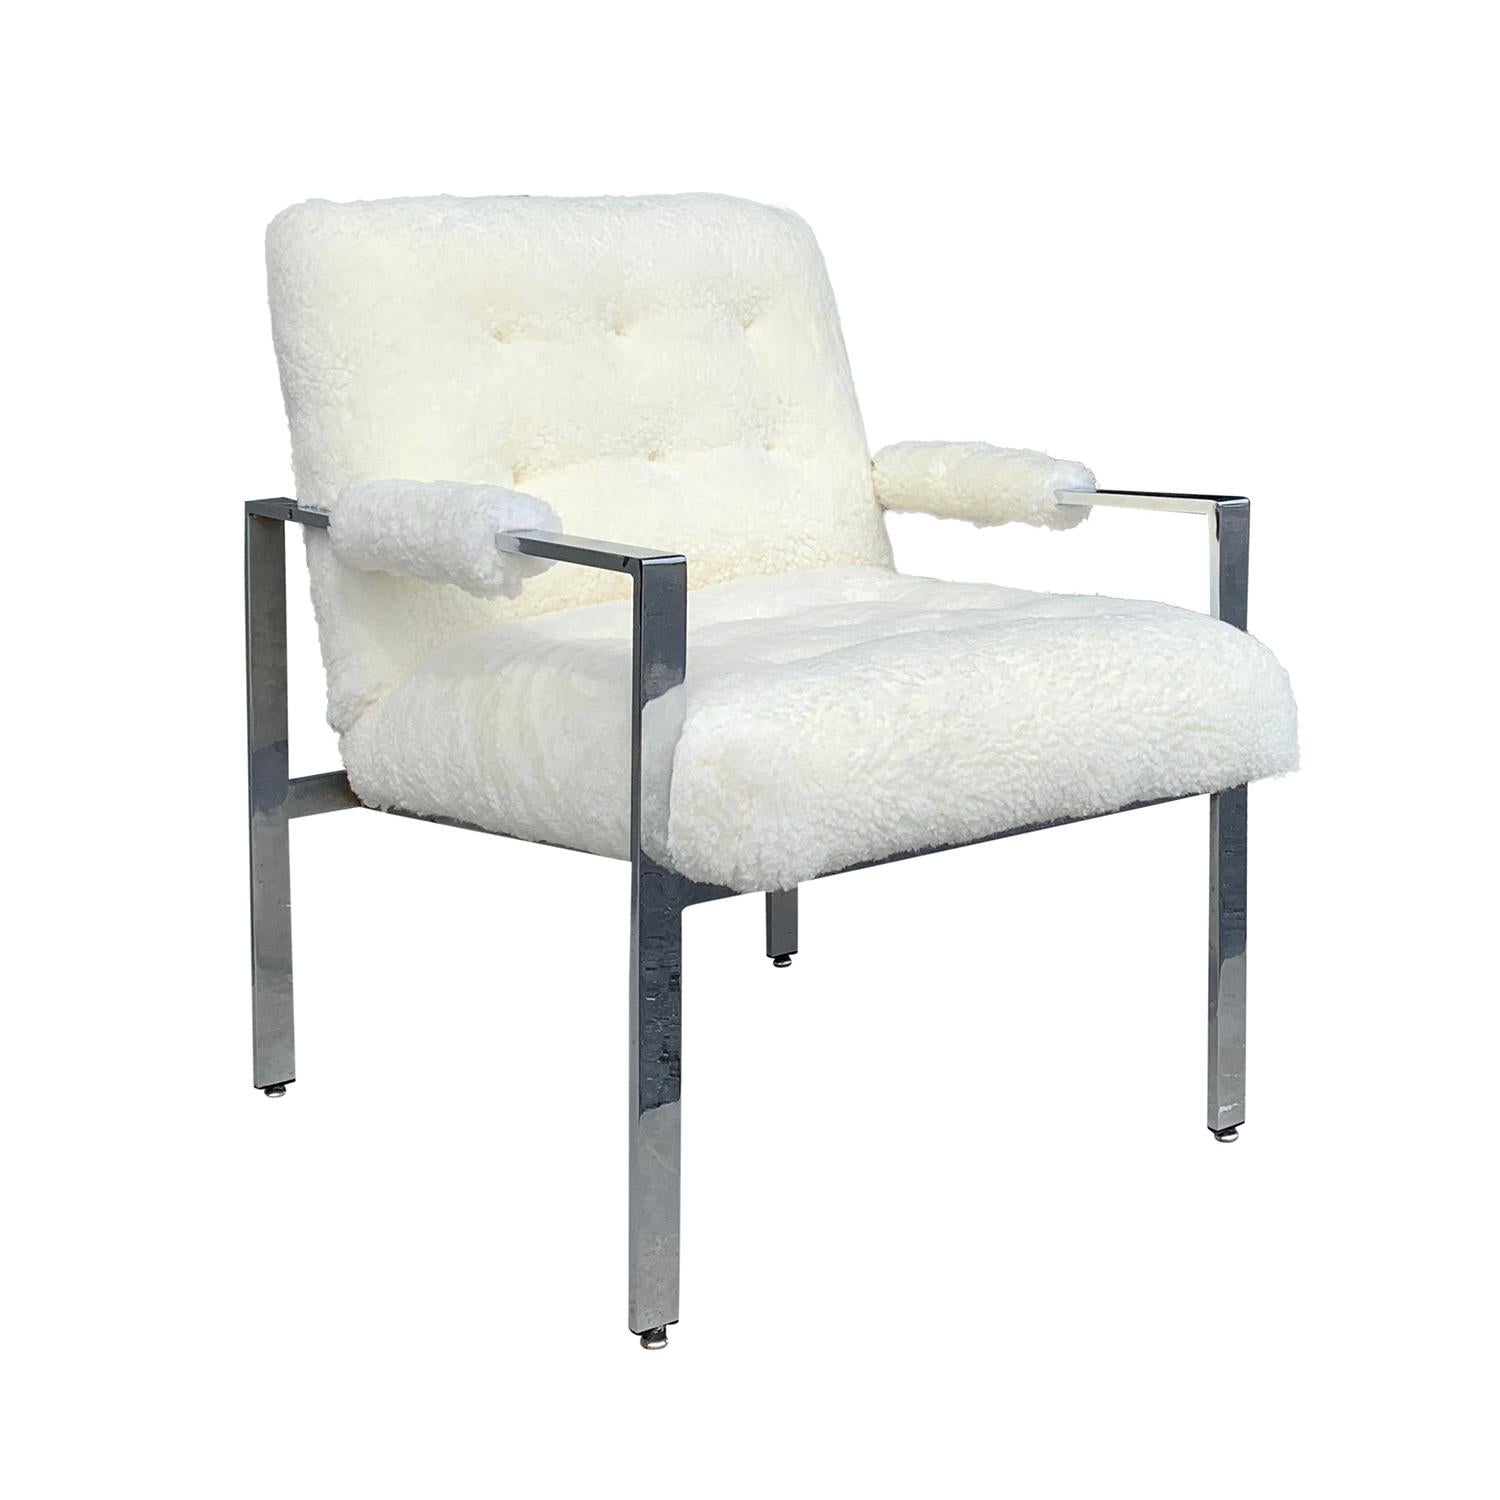 A vintage Mid-Century Modern American armchair made of a chromed aluminum frame, designed by Milo Baughman in good condition. Newly upholstered in white natural sheepskin. Wear consistent with age and use. Circa 1960 - 1970, United States.

Seat